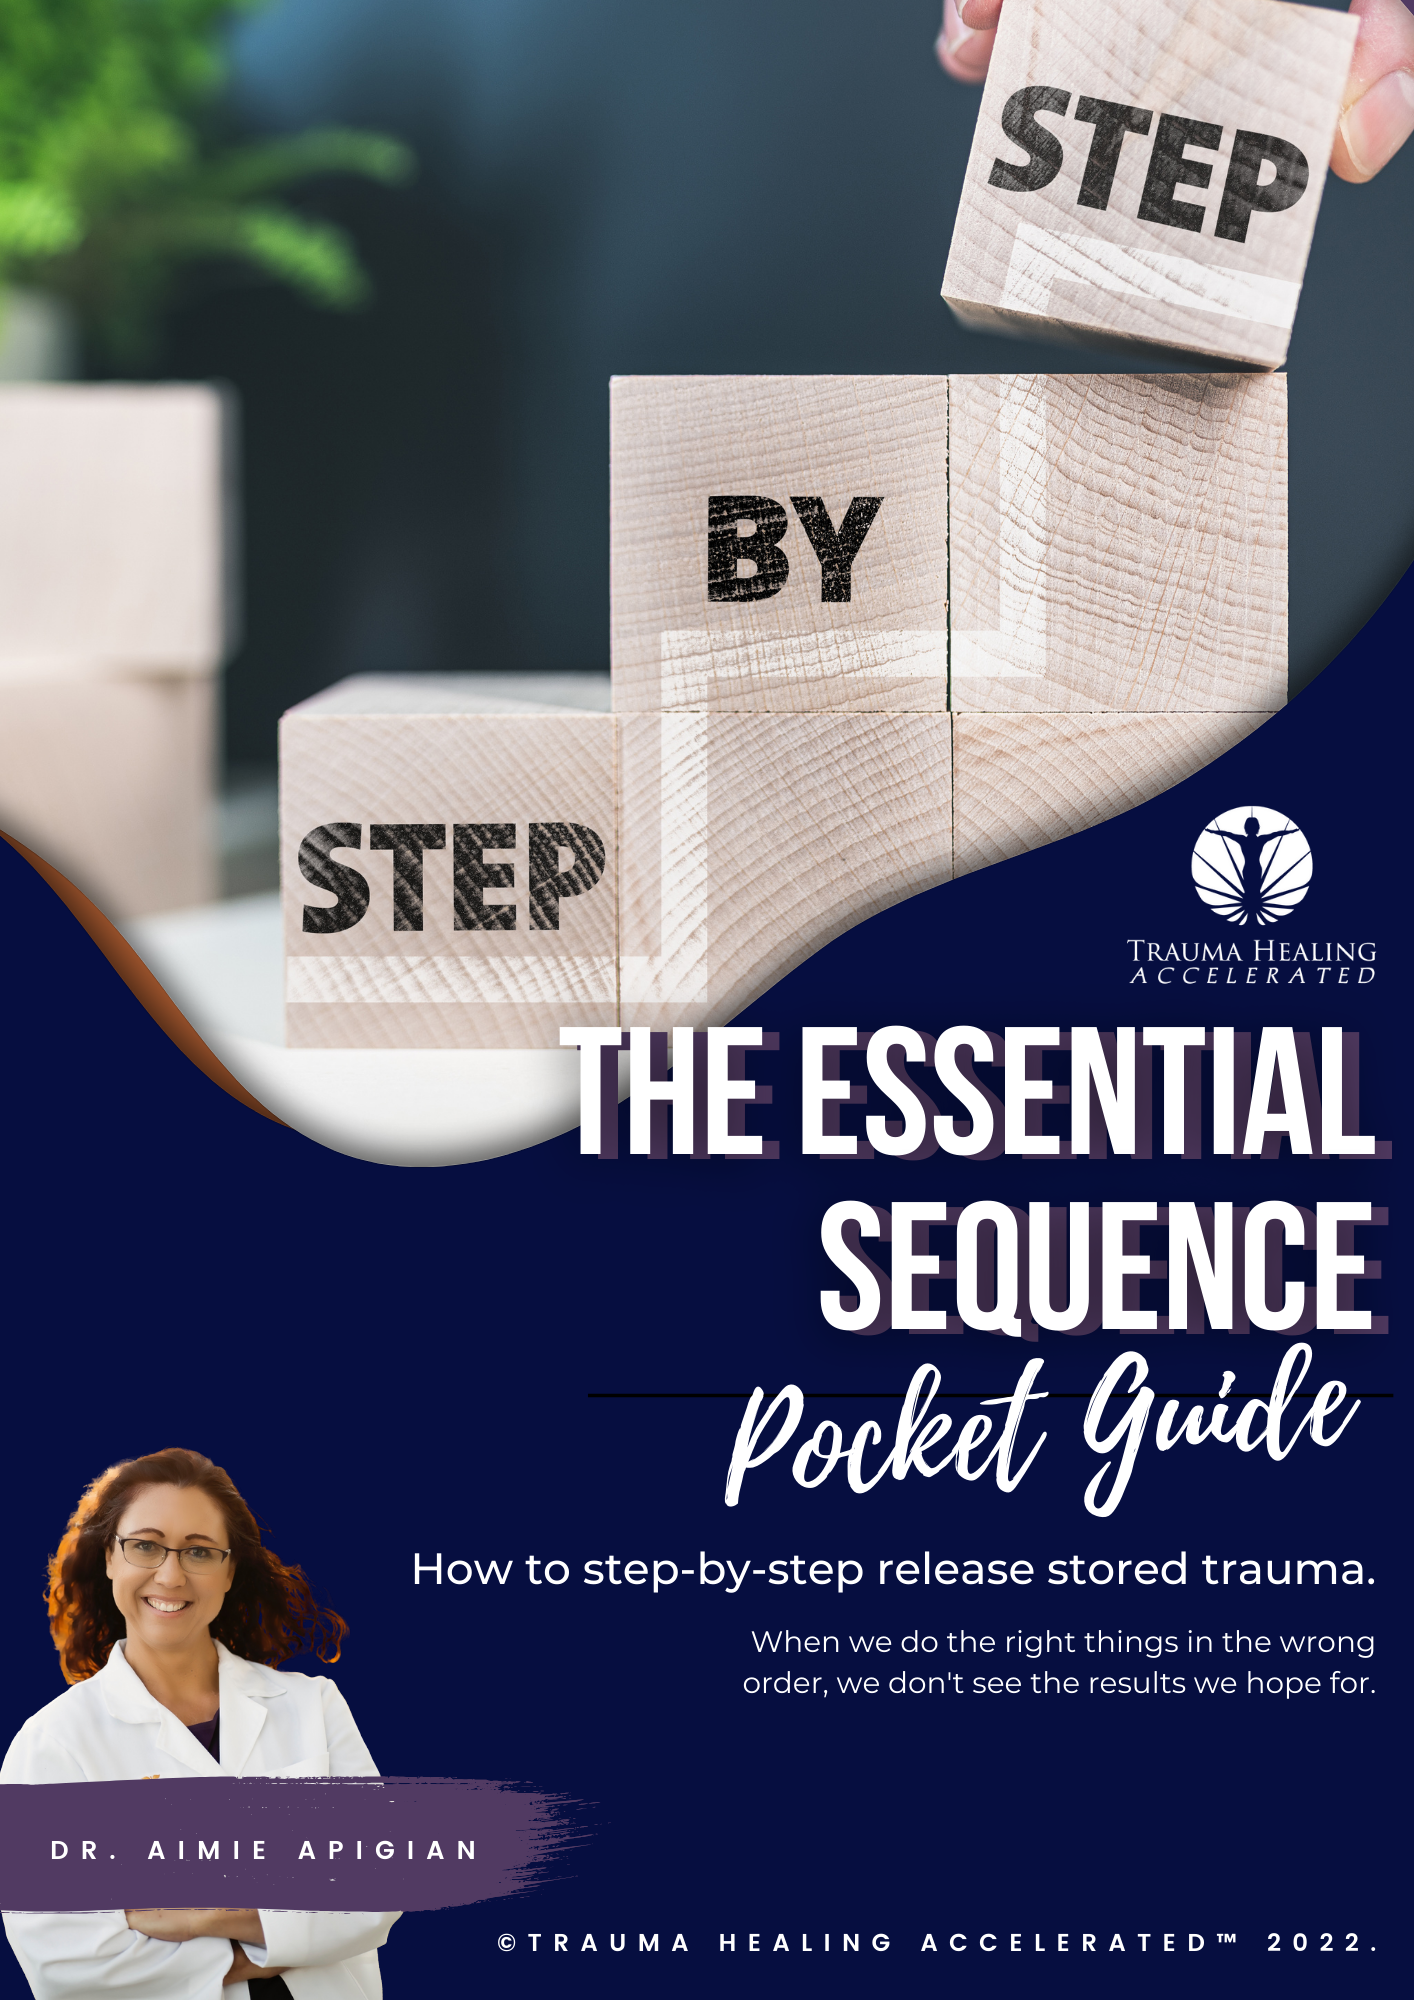 The essential sequence